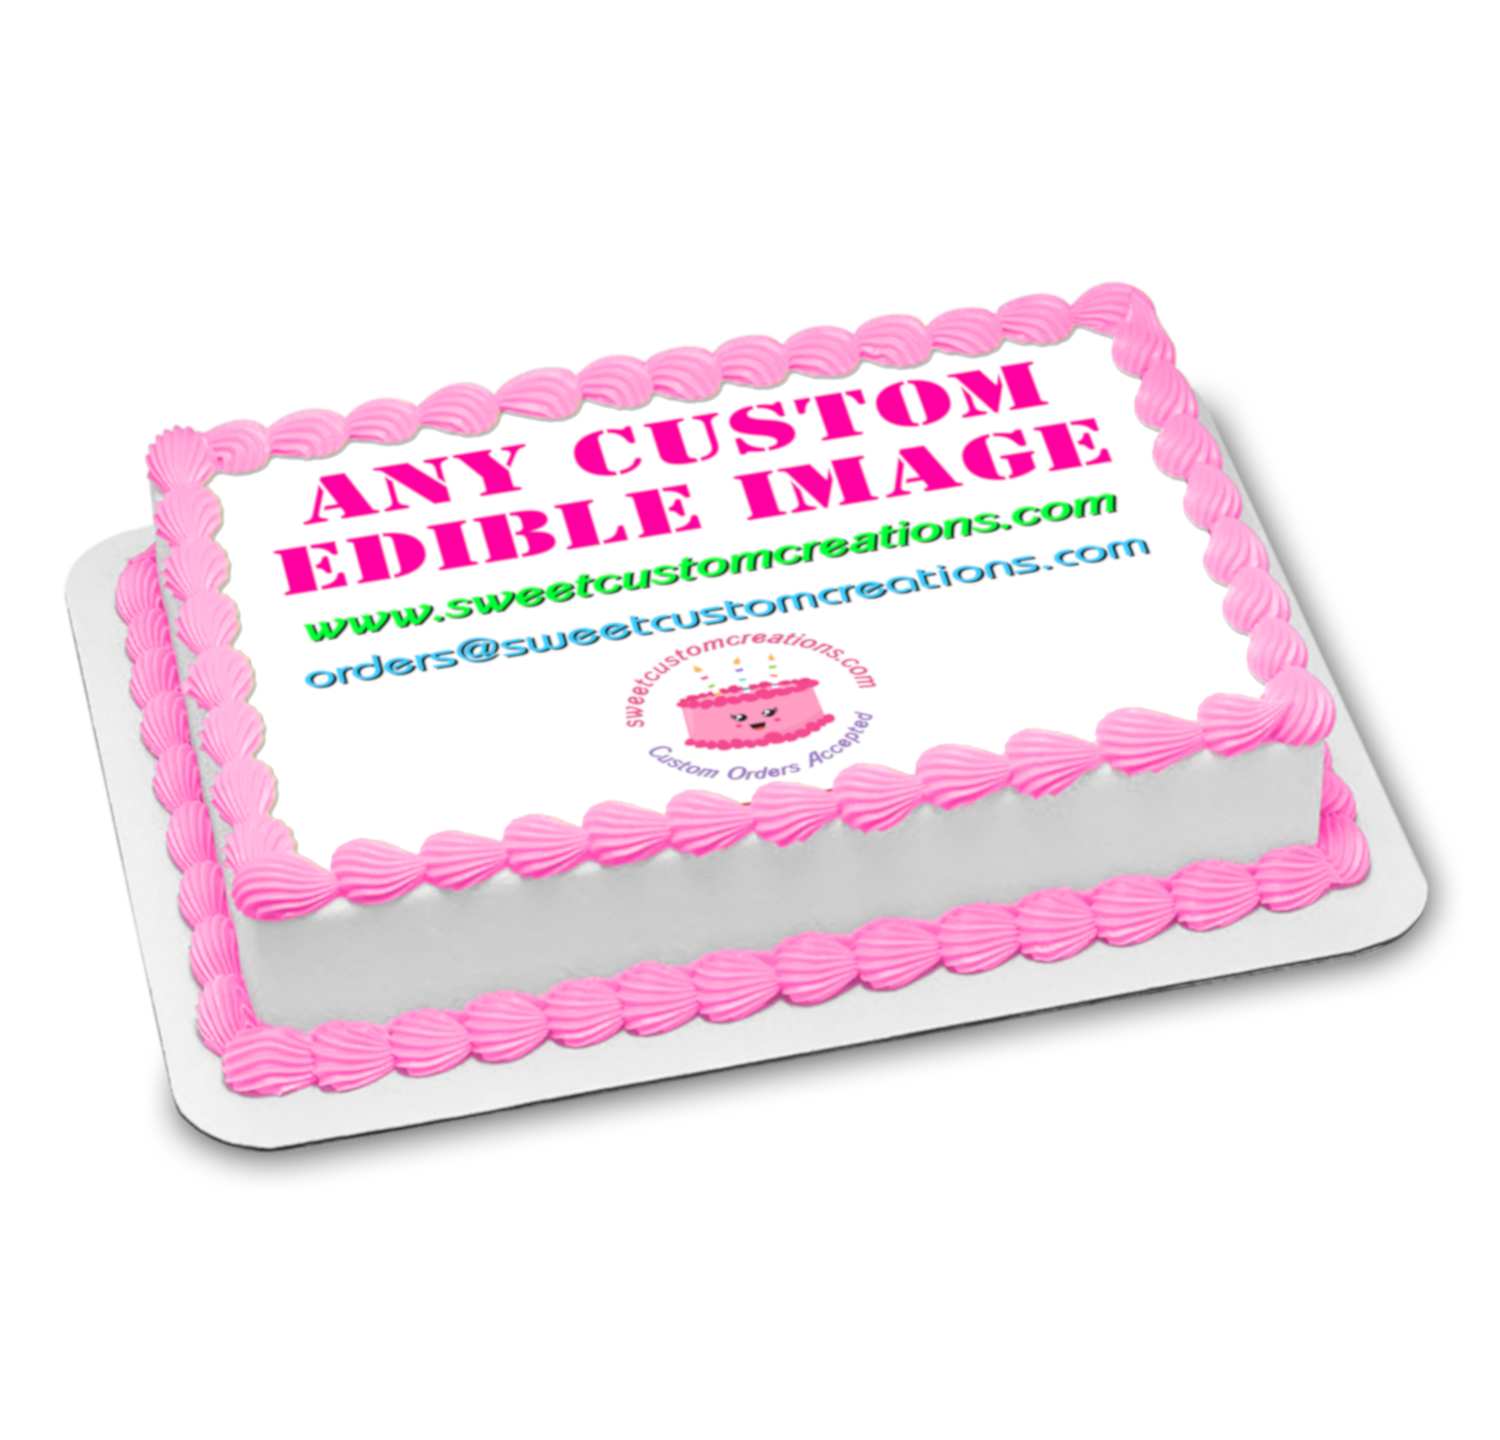 Custom edible print on chocolate transfer sheet oval 4 x 2.5 cm (32 pieces  / sheet) 05660 from Sweetec